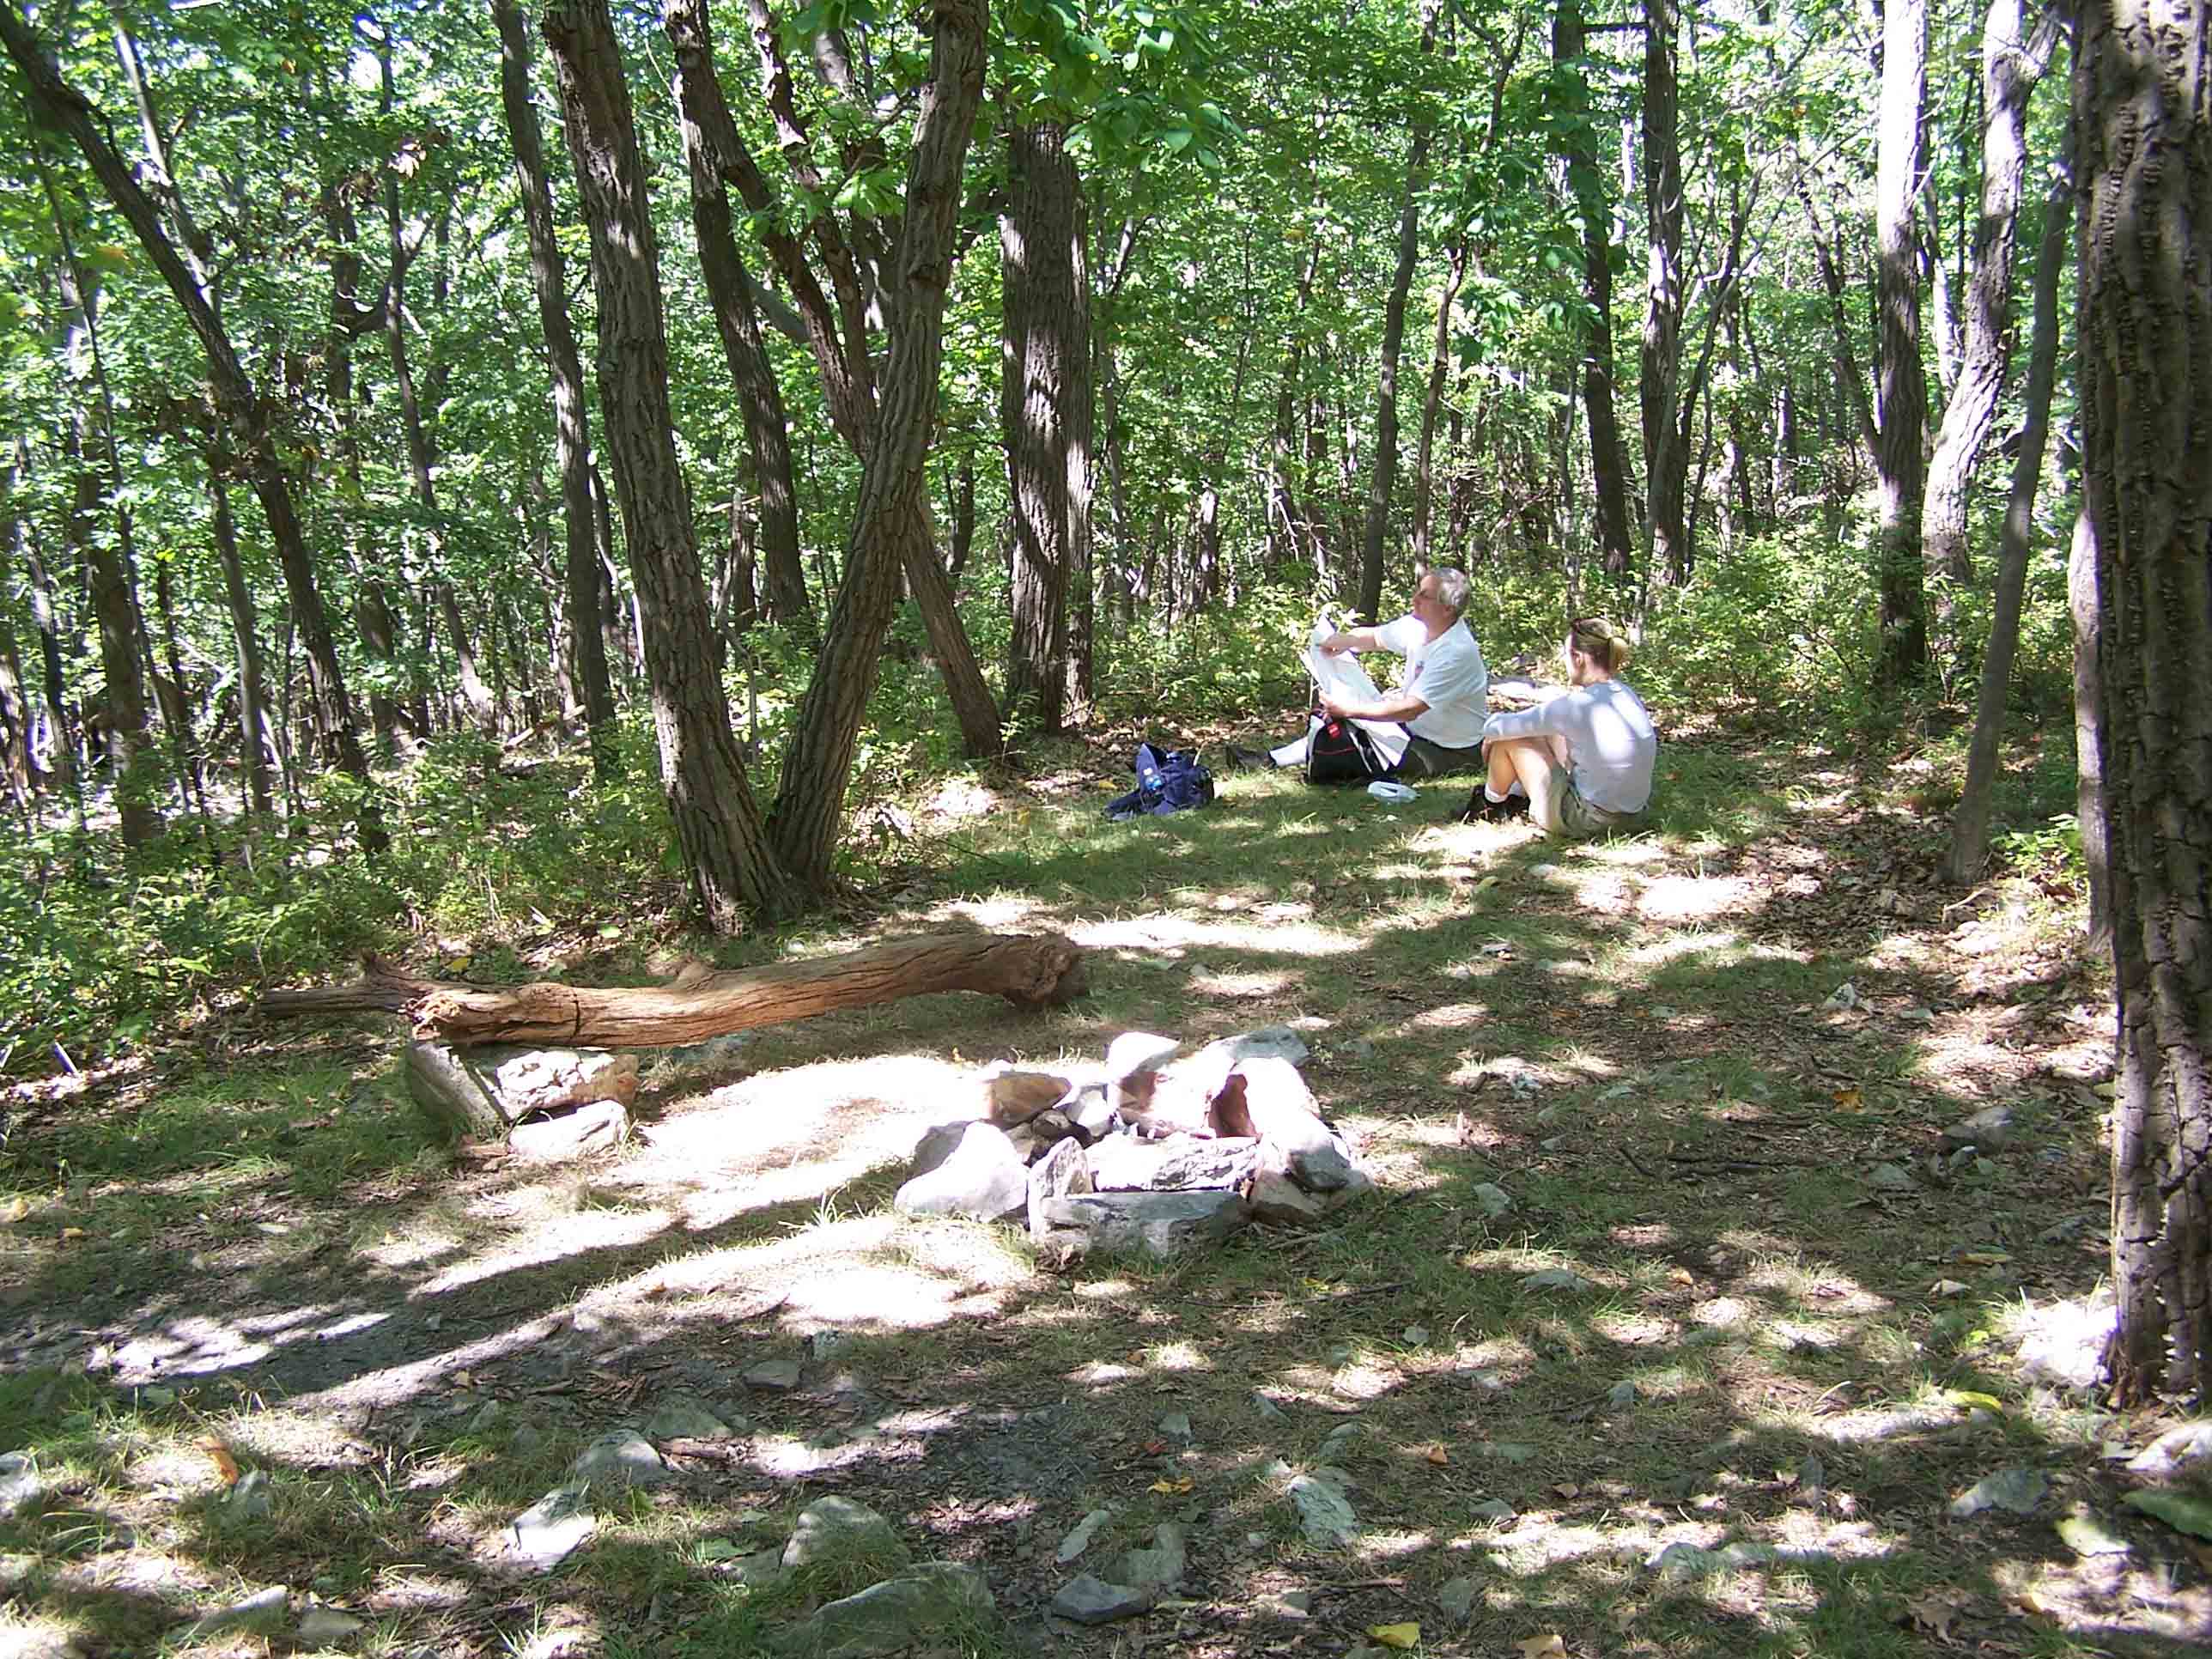 Campsite between Wolf Rocks and Wind Gap. Courtesy at@rohland.org